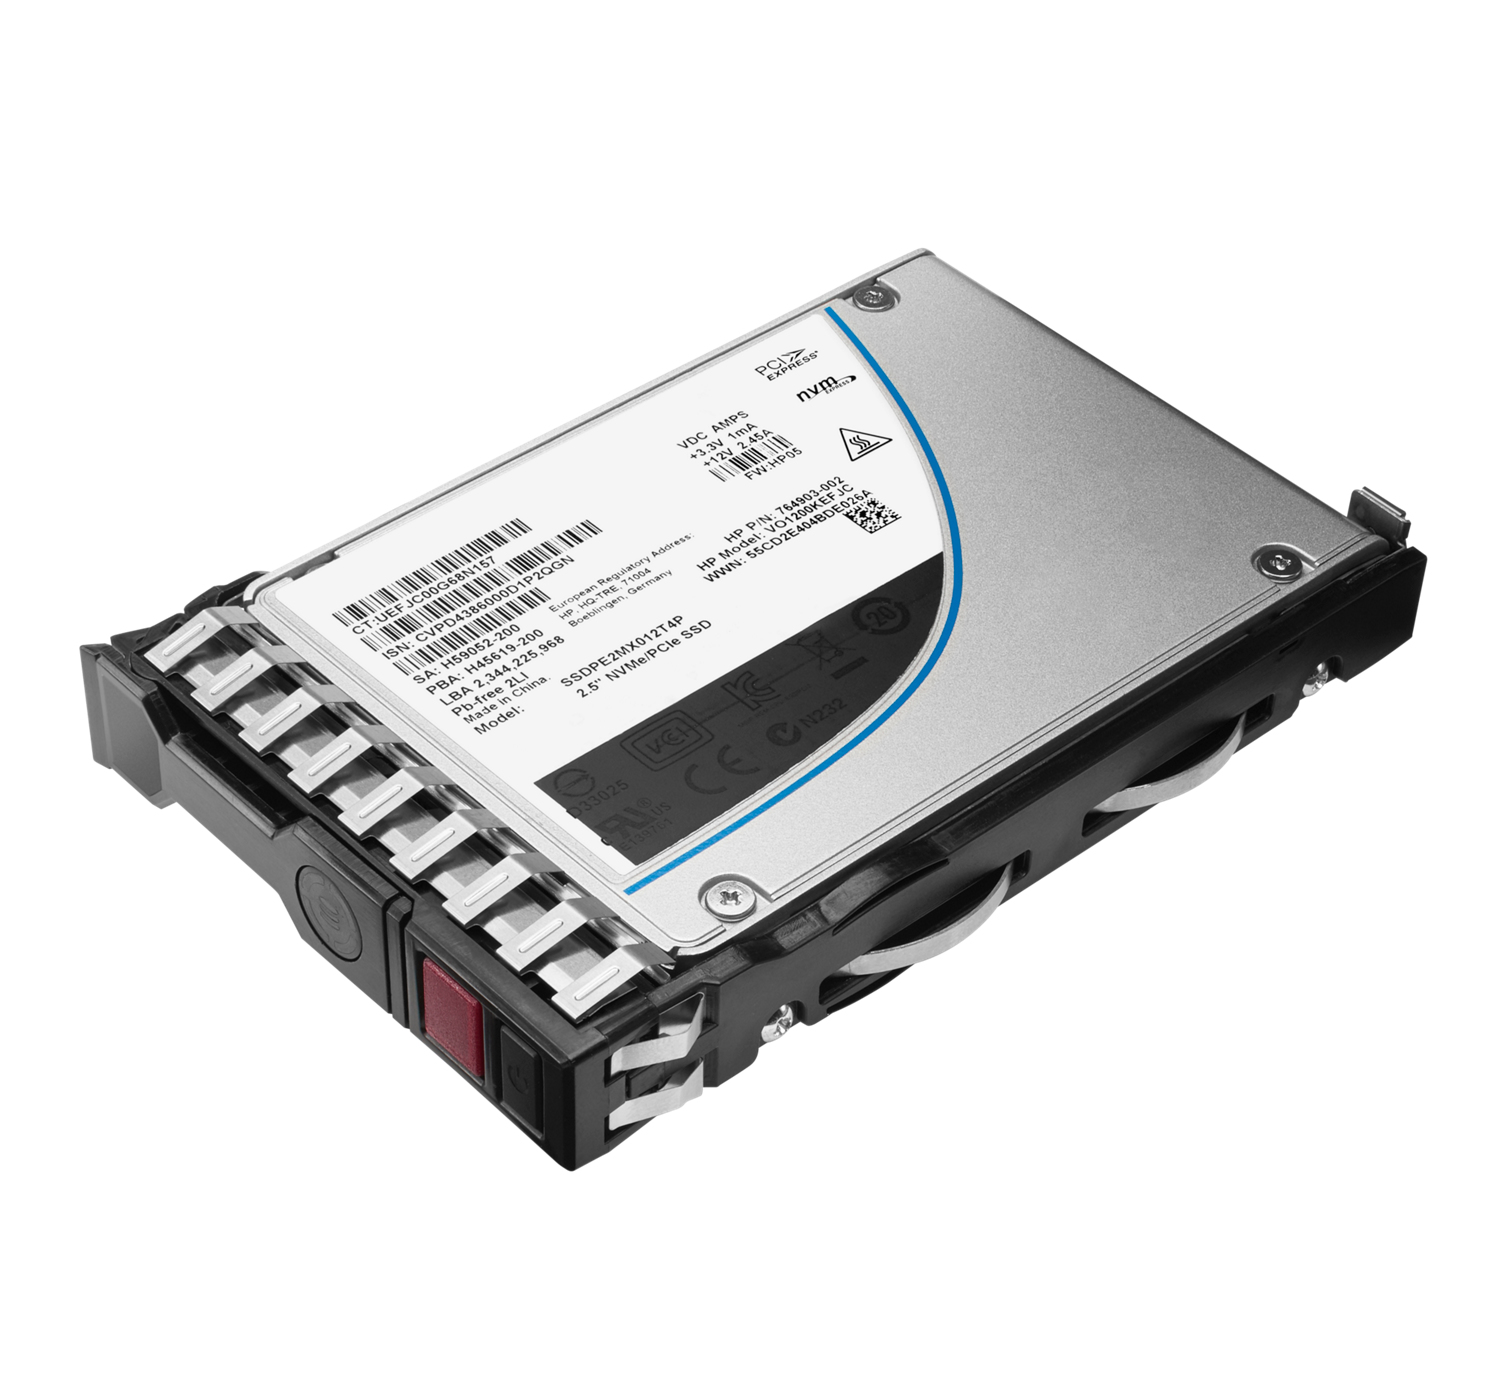 Bild von HPE 960GB SATA MU SFF SC DS SSD**Shipping New Sealed Spares** - Solid State Disk - Serial ATA